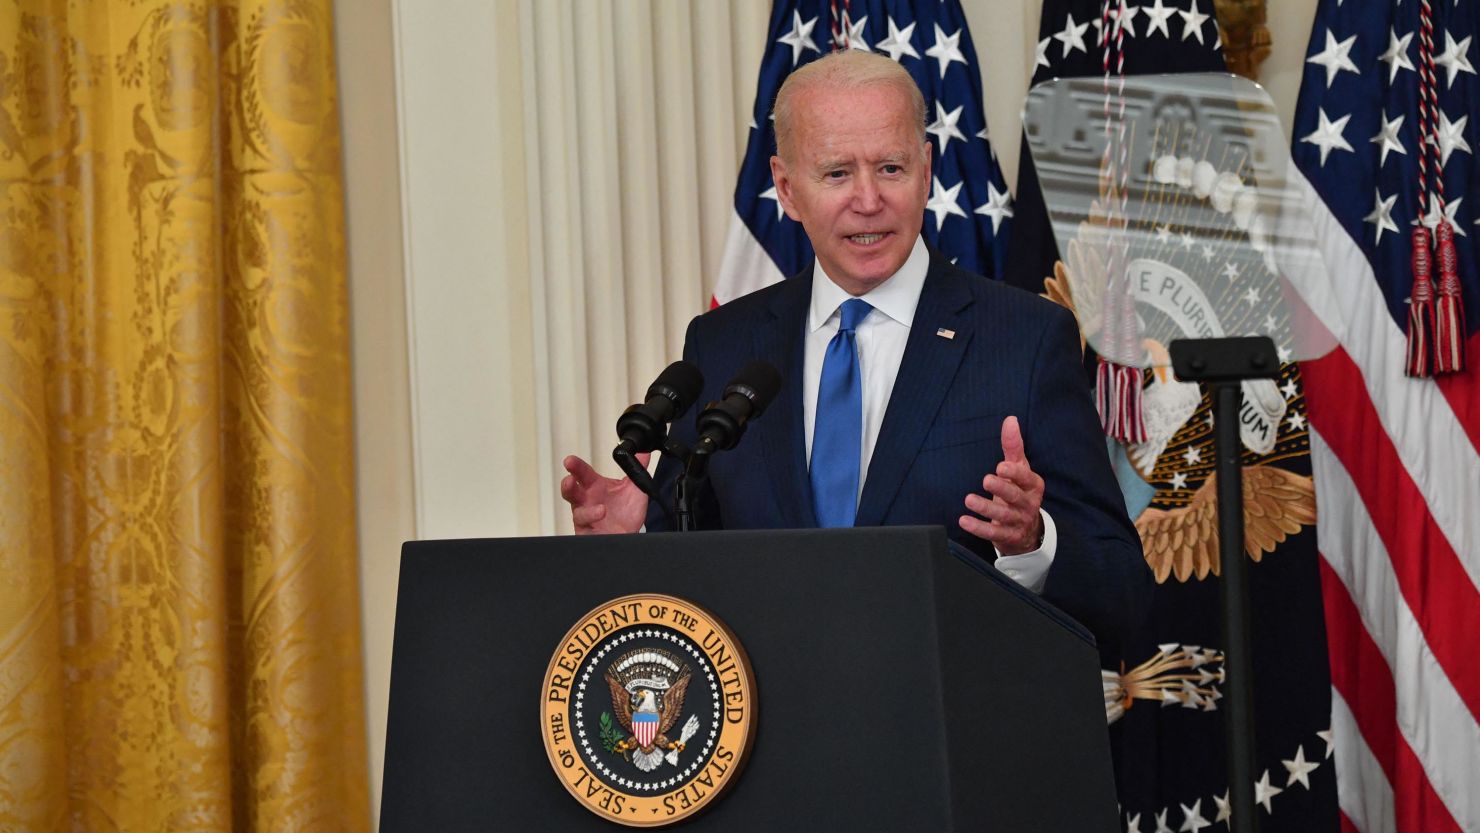 US President Joe Biden speaks during an event to commemorate Pride Month, in the East Room of the White House on June 25, 2021 in Washington, DC. 